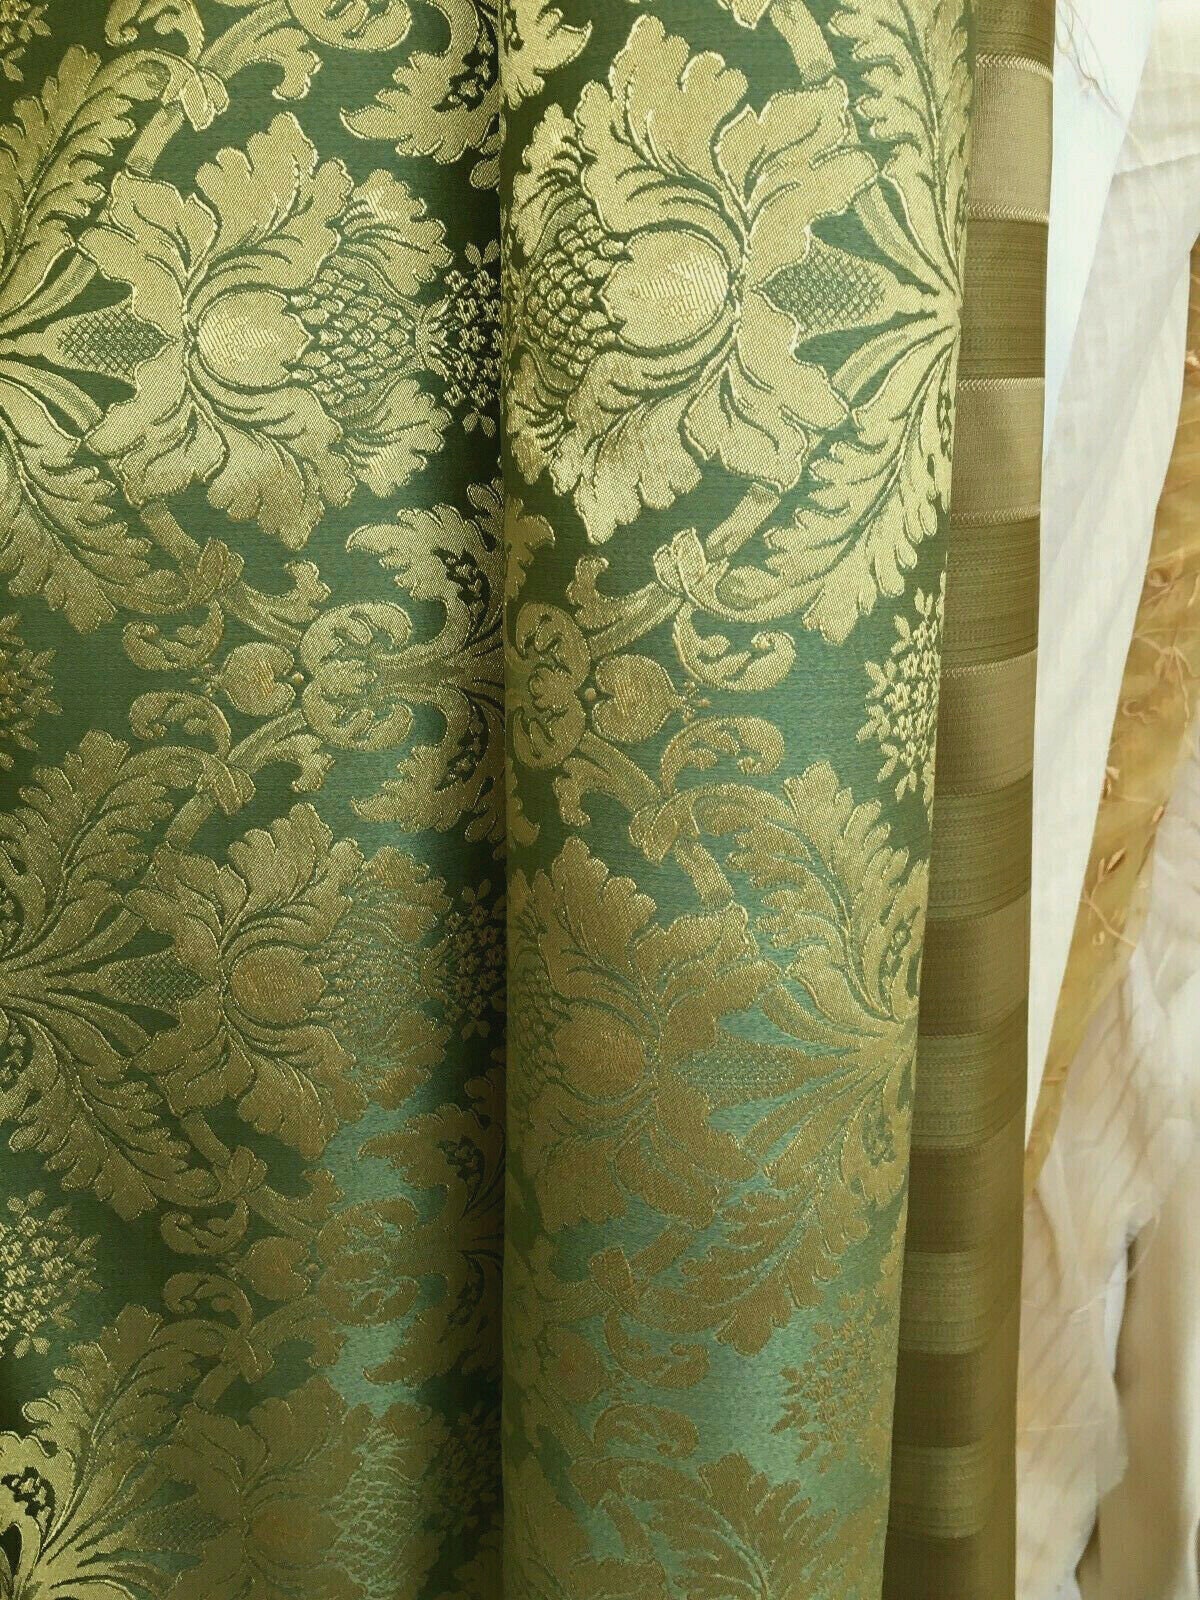 SAGE GREEN GOLD Damask Jacquard Brocade Flower Floral Fabric (110 in.) Sold By The Yard